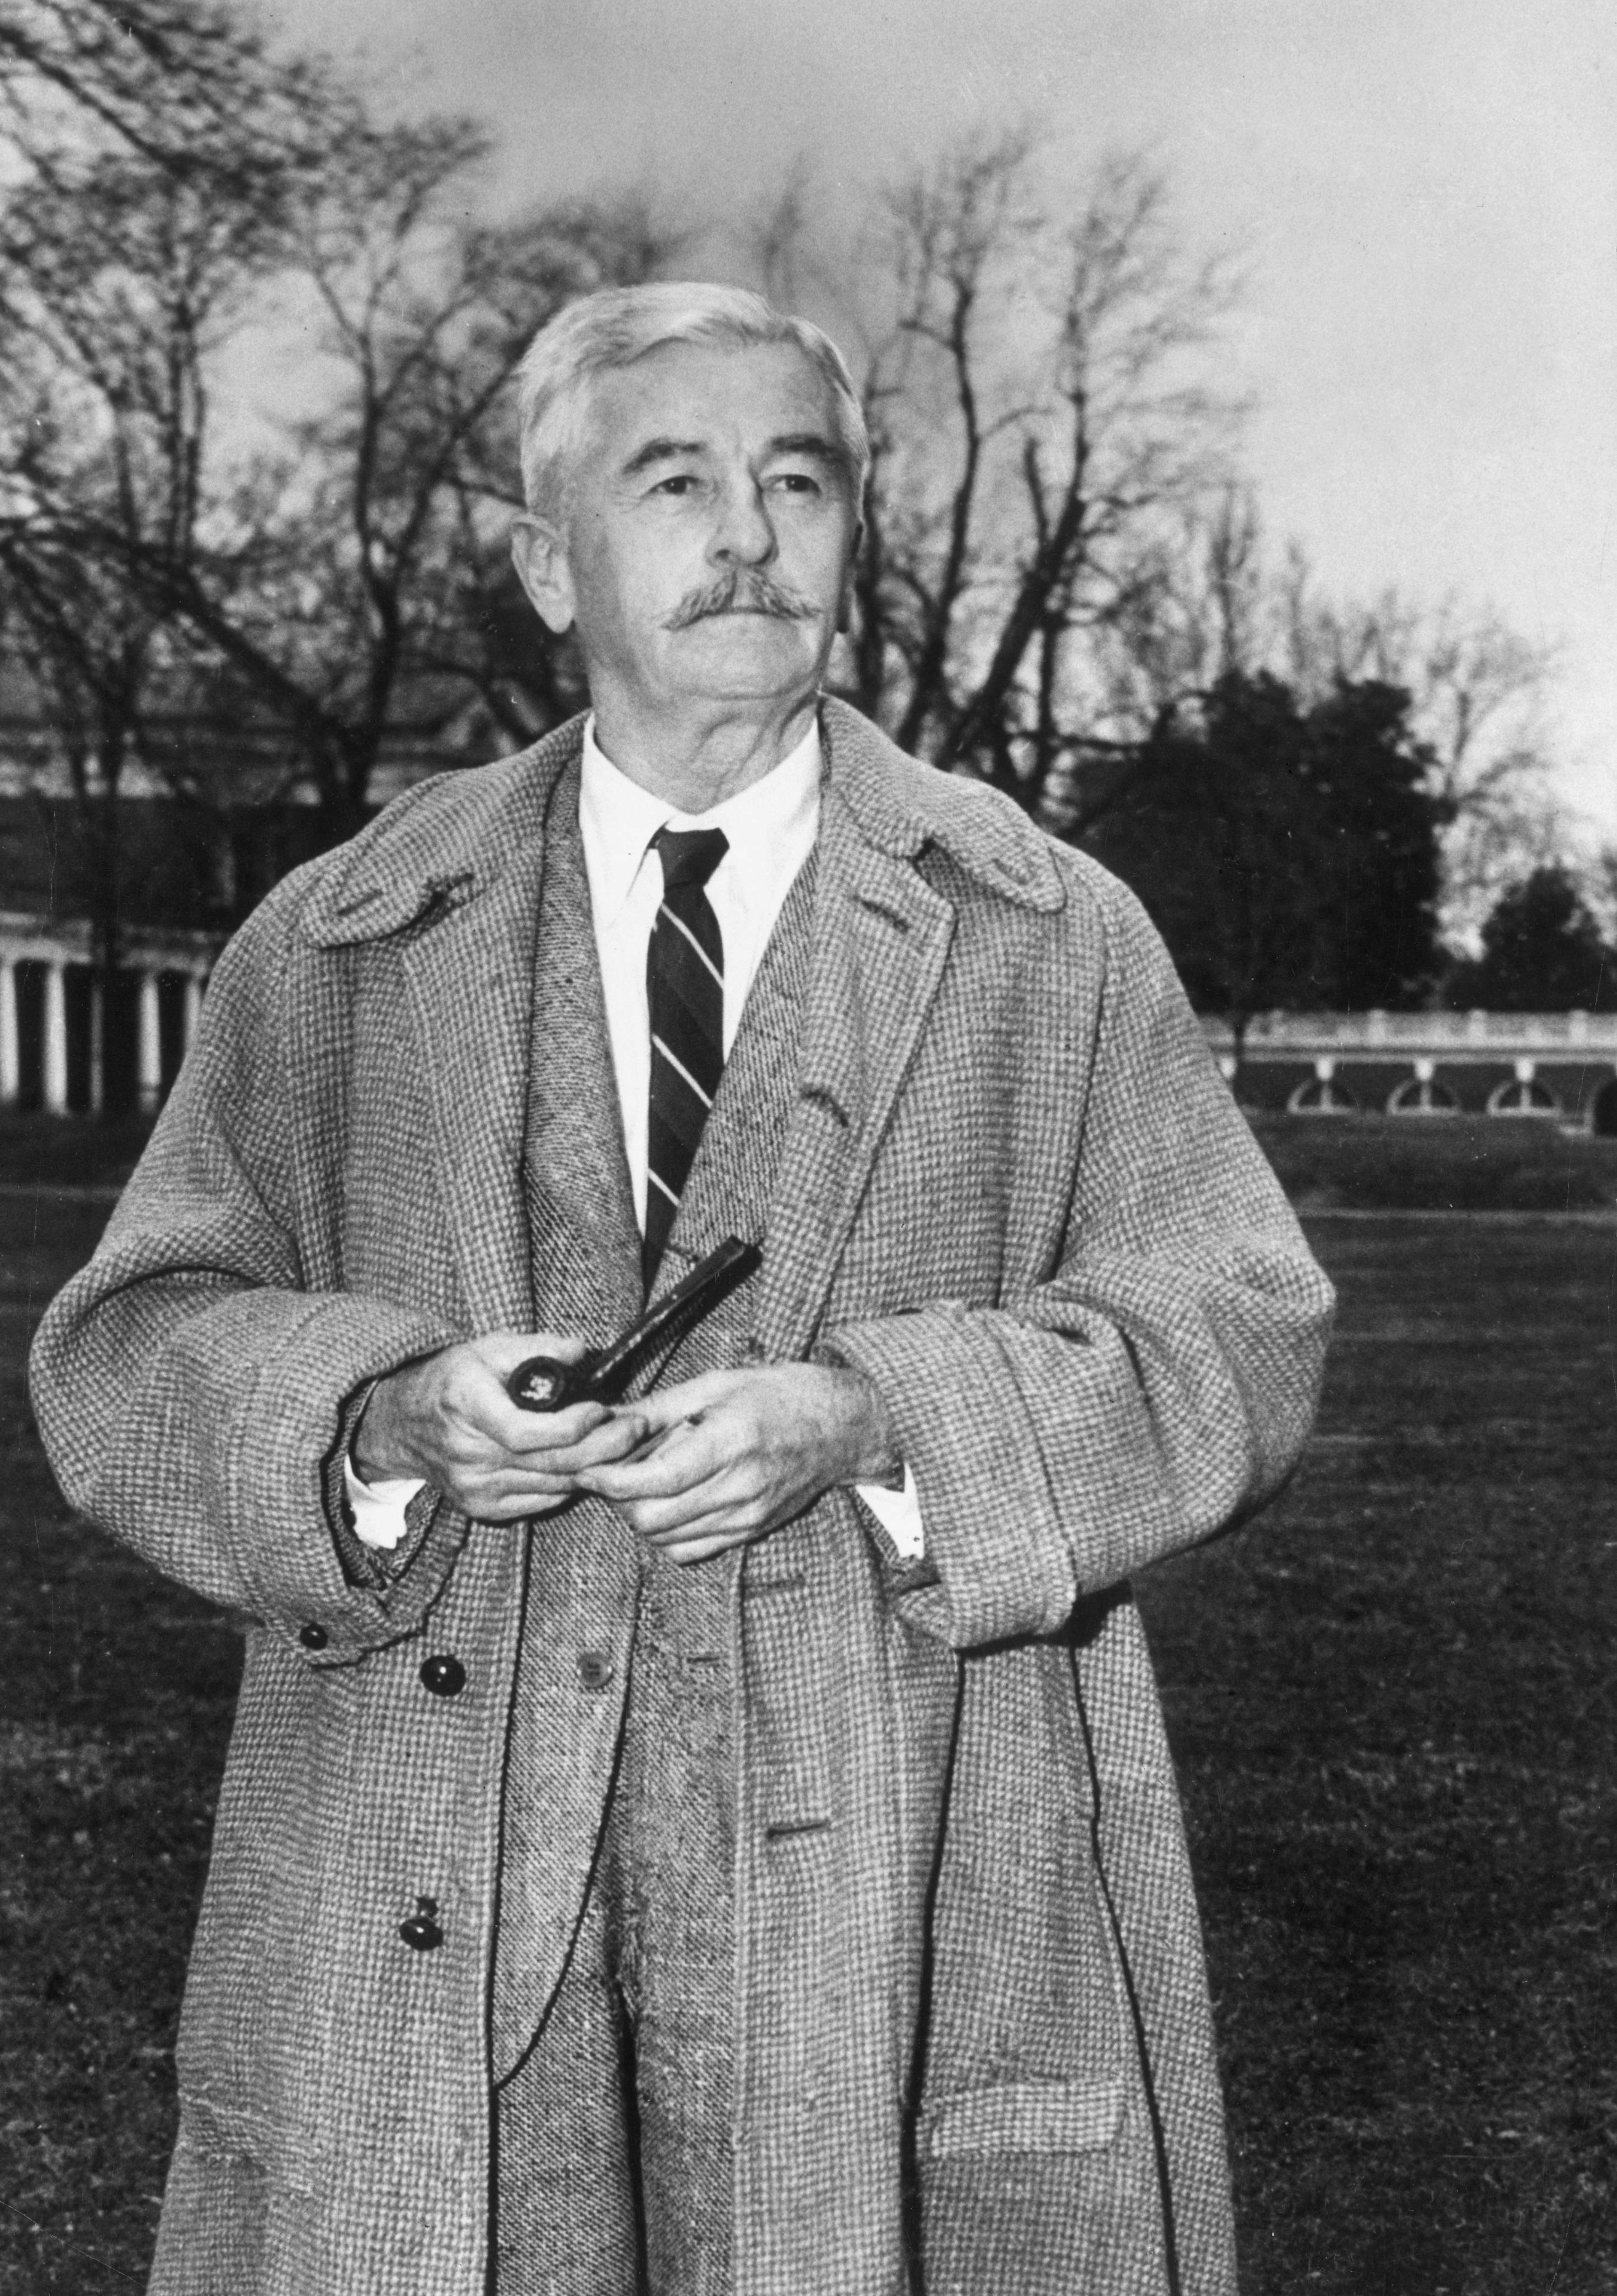 circa 1960: American author William Faulkner (1897 - 1962) stands outdoors, wearing a tweed overcoat and holding a pipe. (Photo by Hulton Archive/Getty Images)